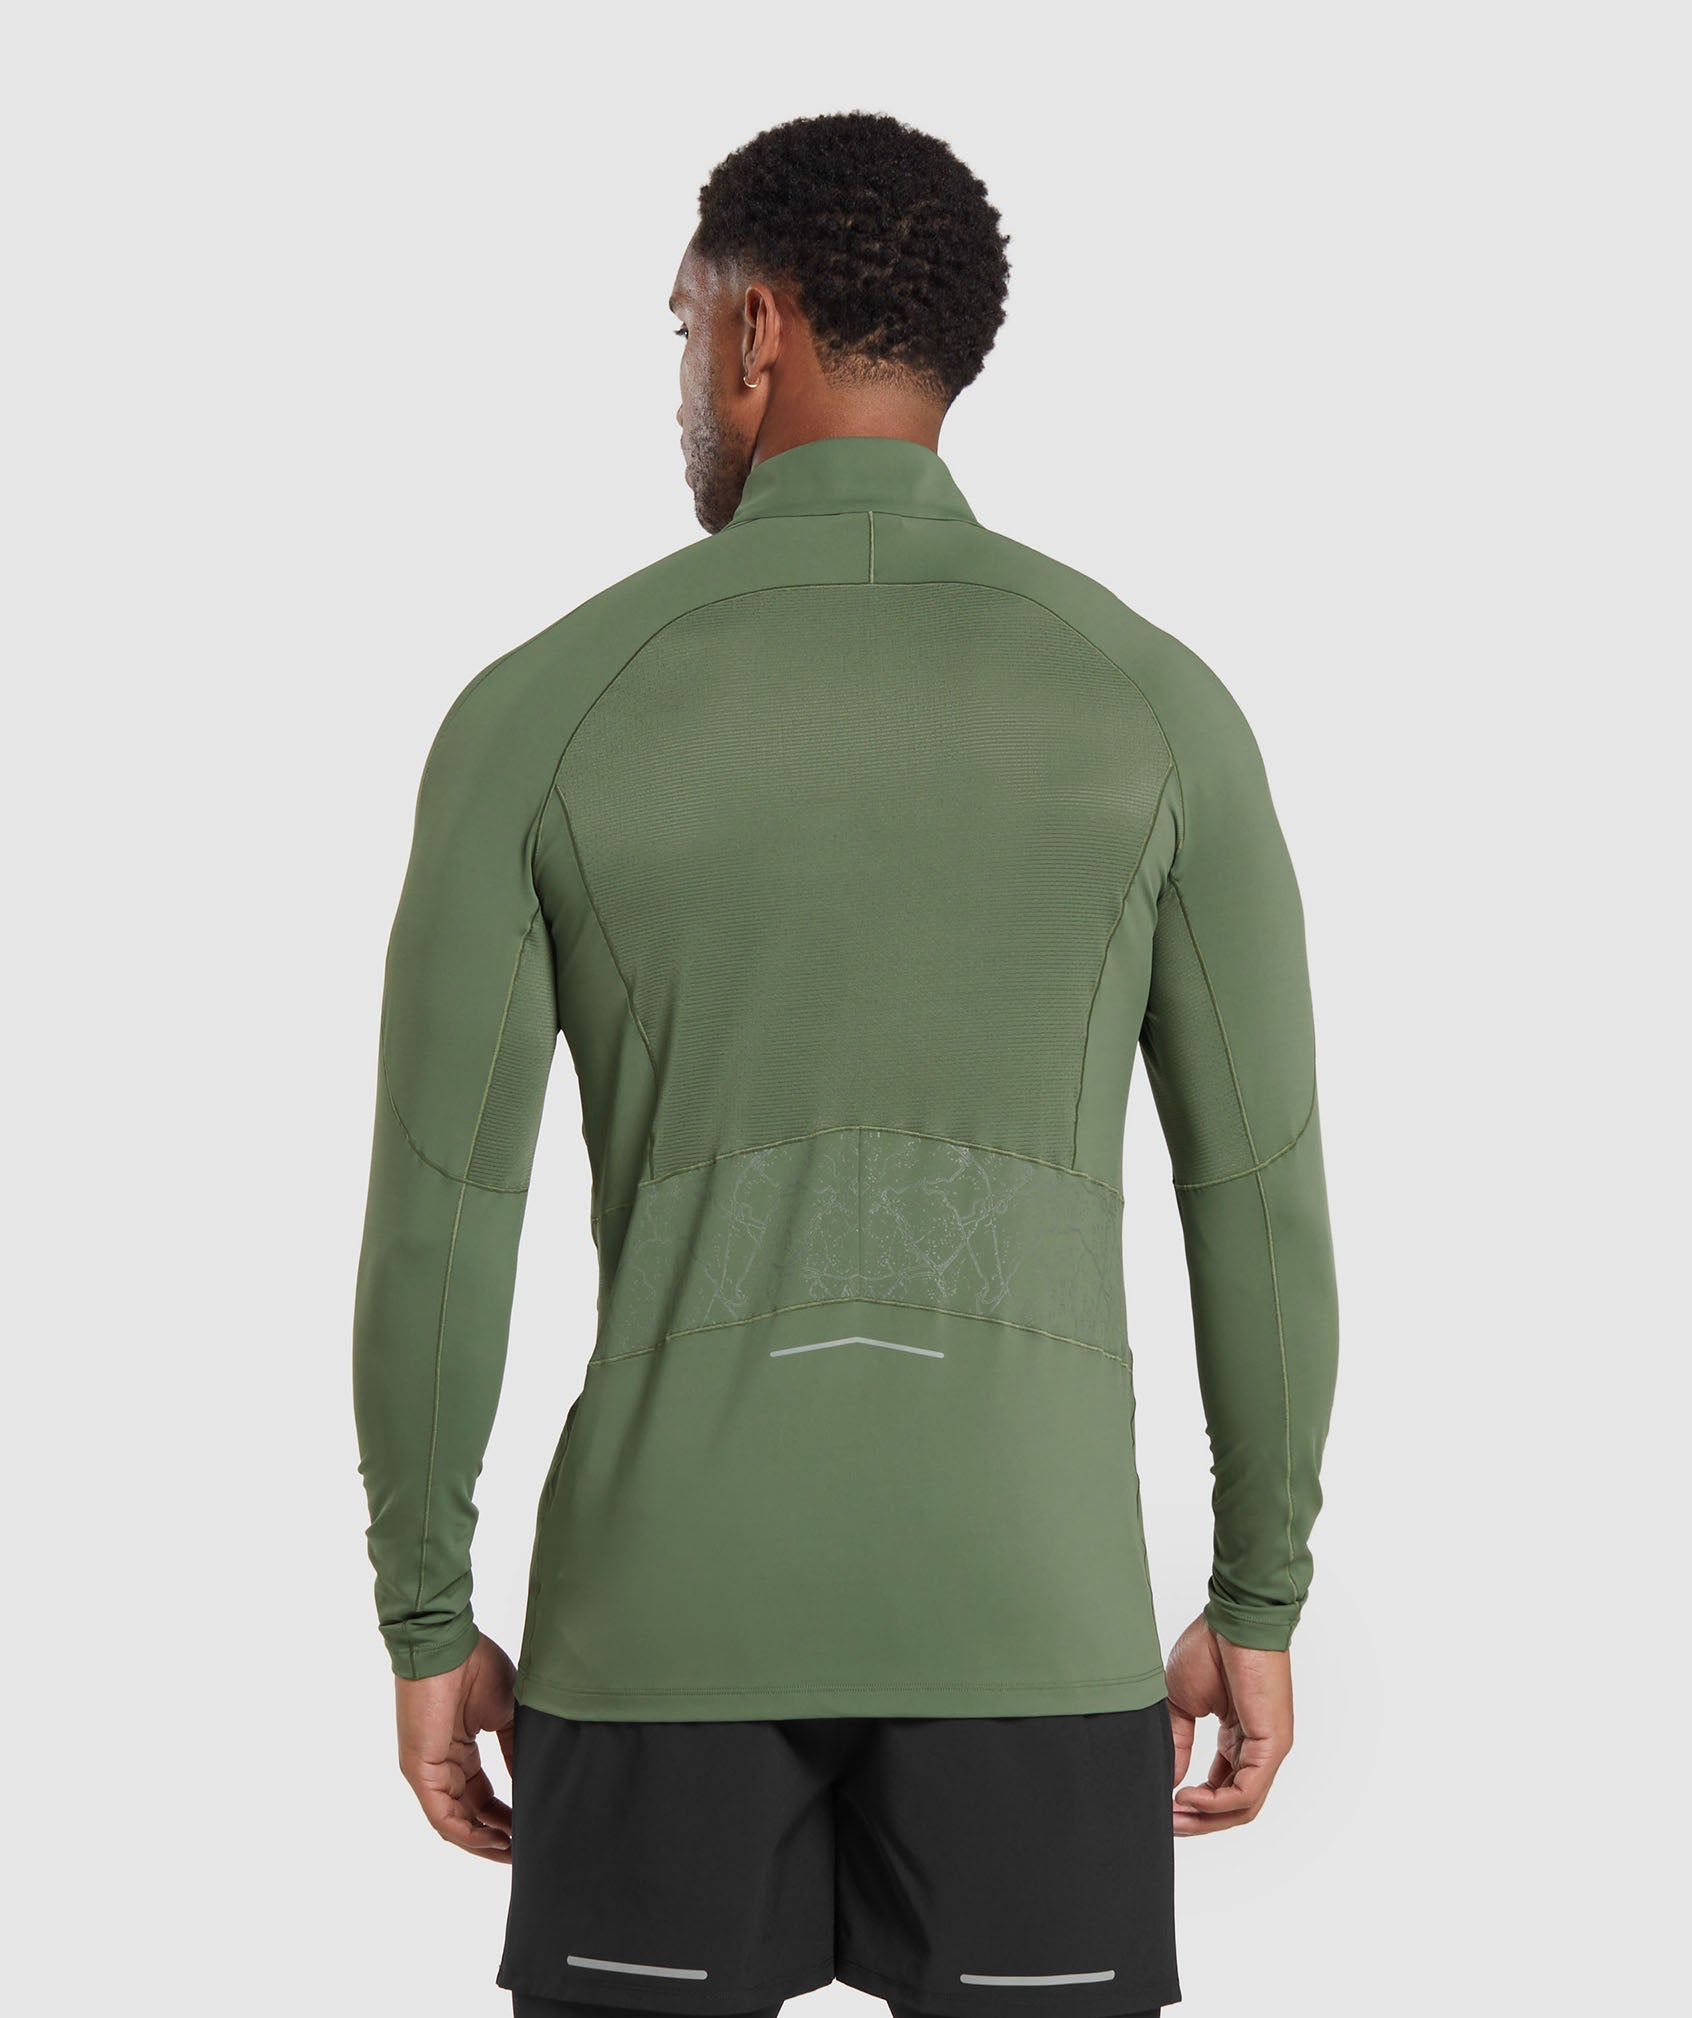 Speed 1/4 Zip in Core Olive - view 3